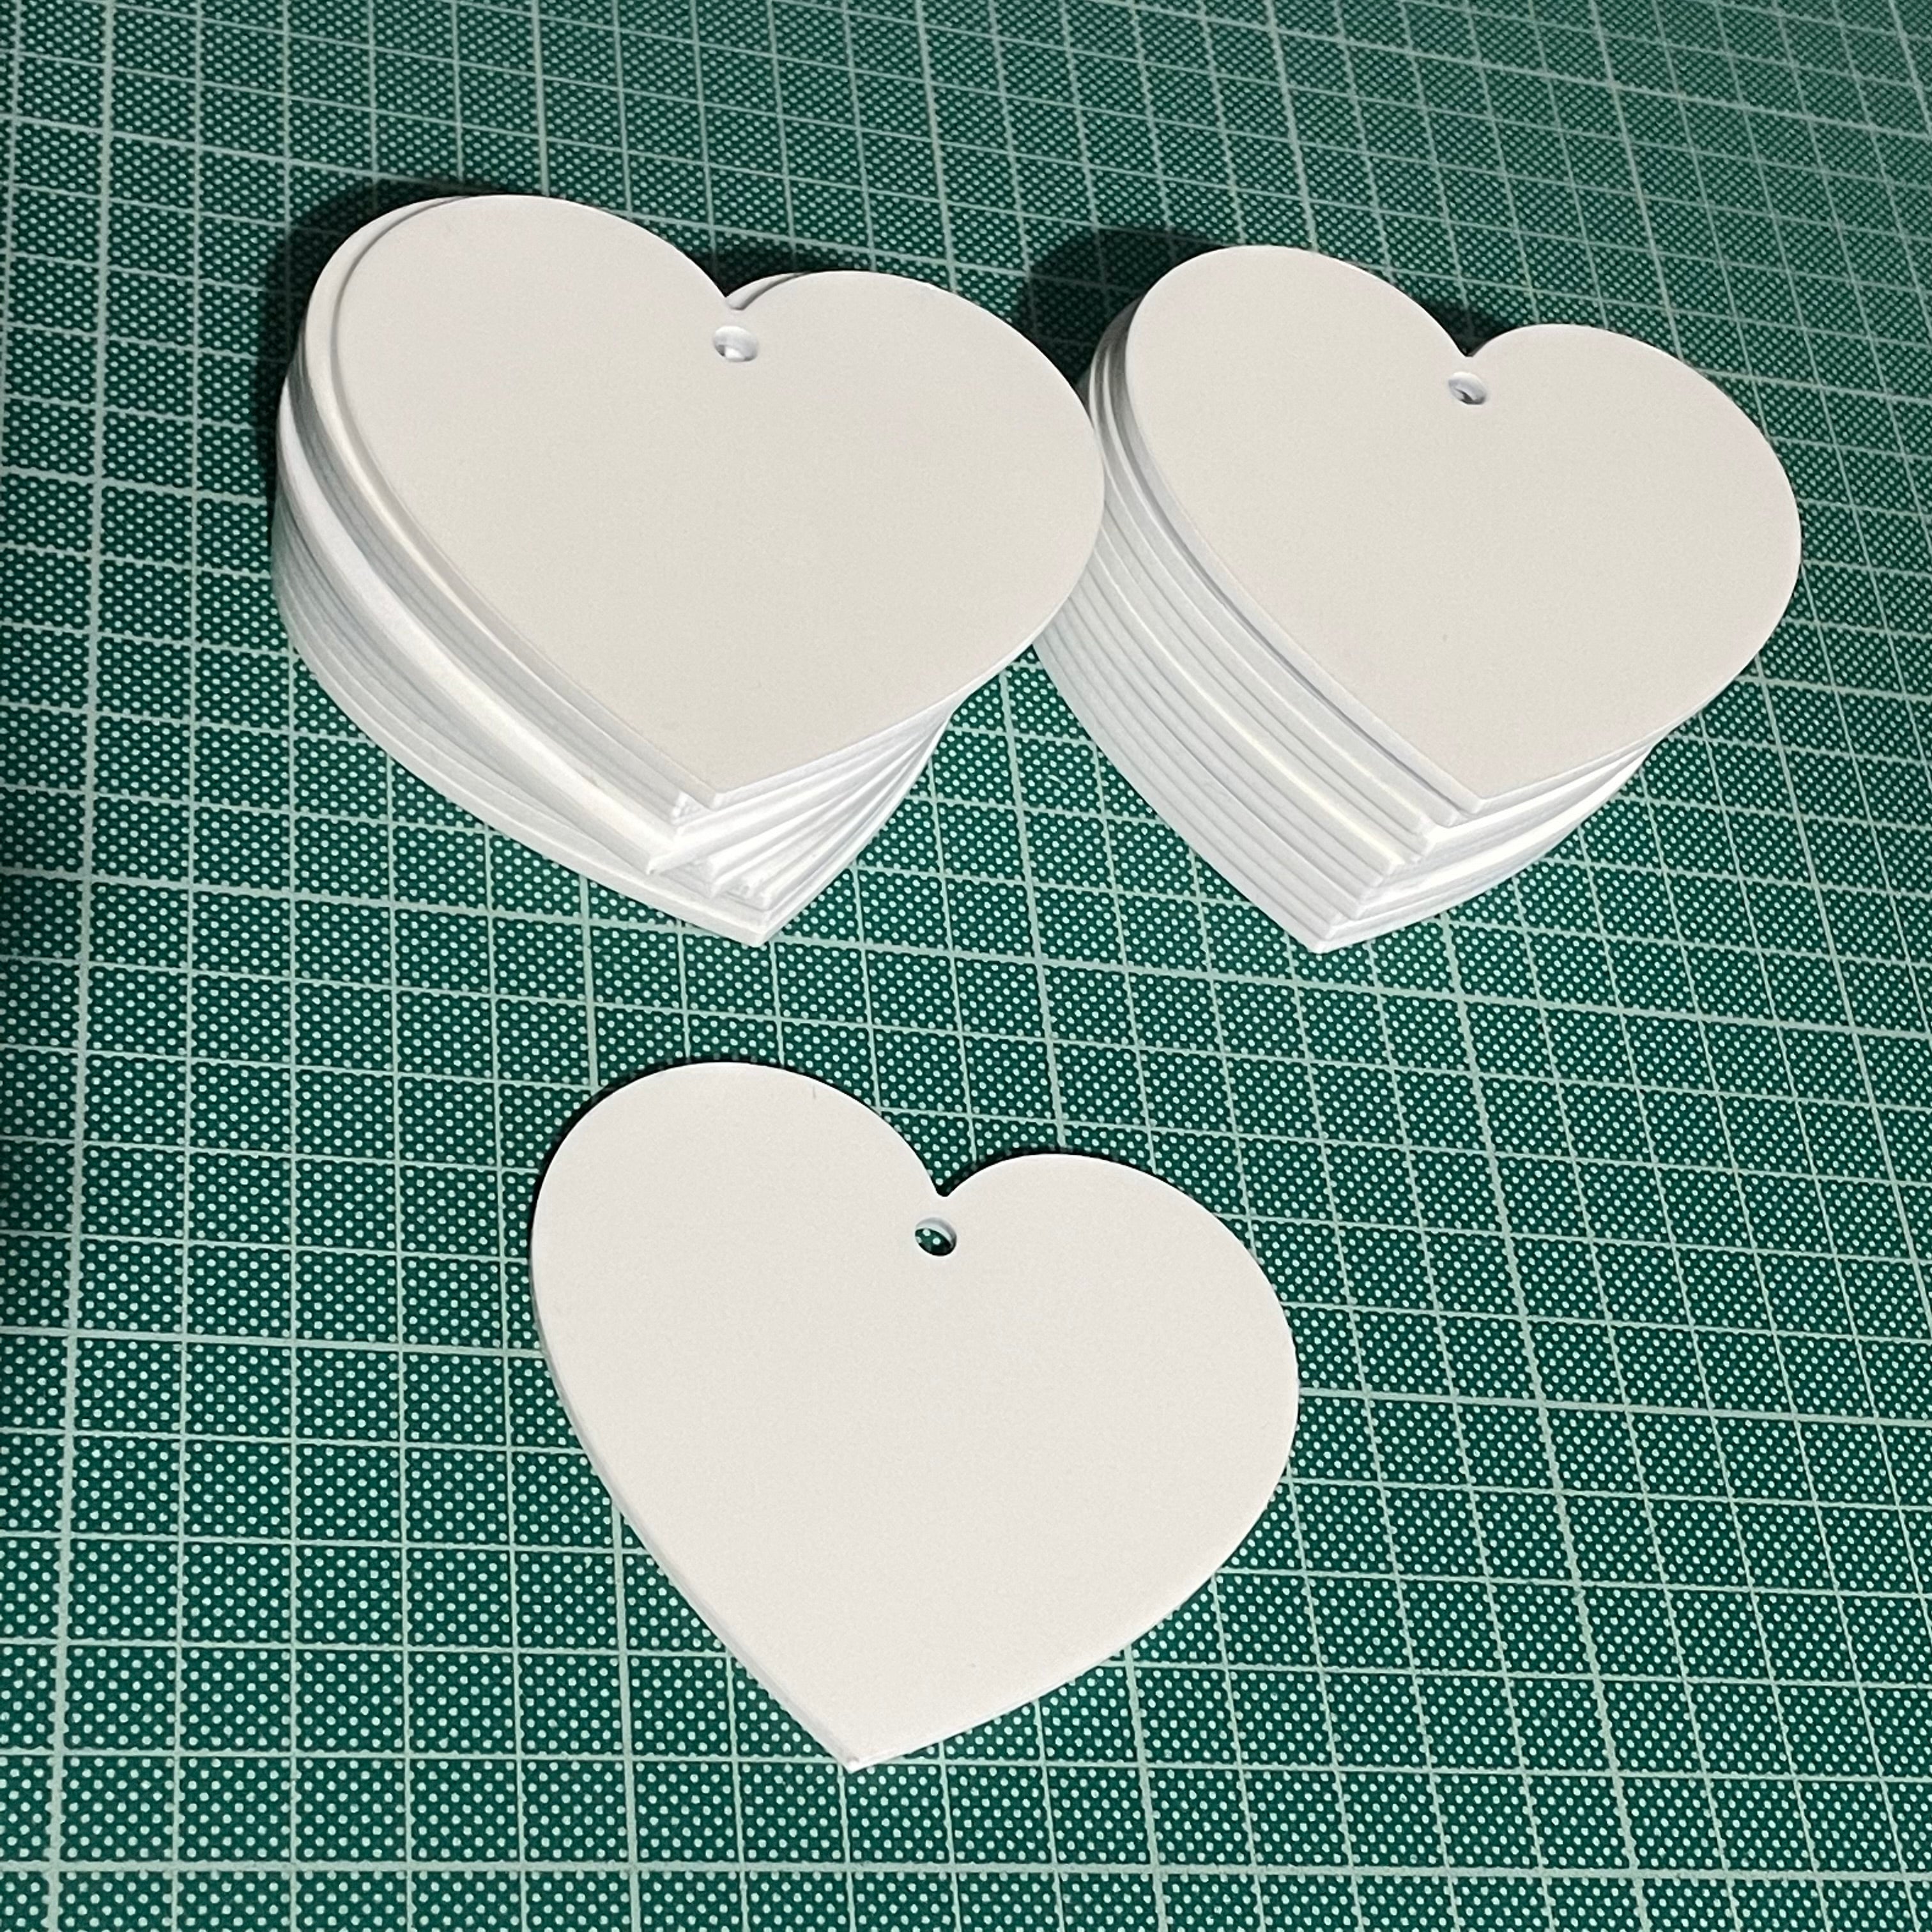 Printing Jig for 80mm Heart Blanks - Roland MO-240 Flatbed Printer (TBA Spaces)